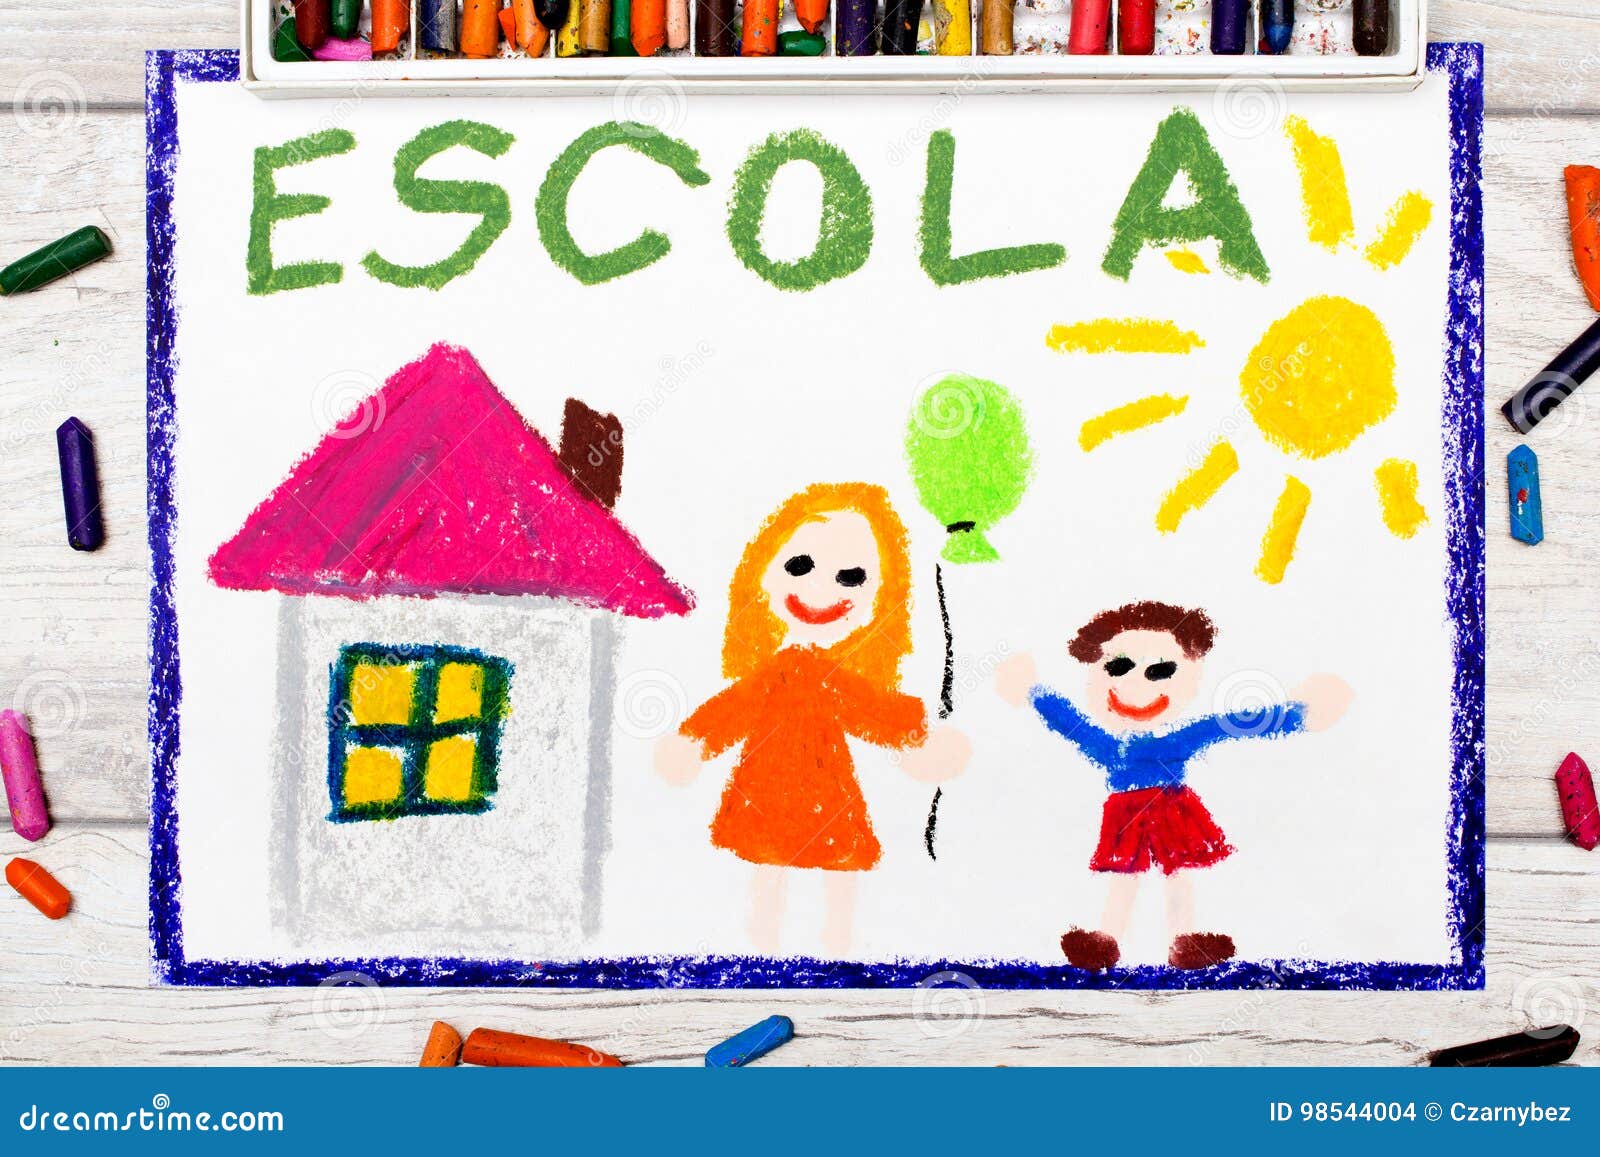 photo of colorful drawing: portuguese word school